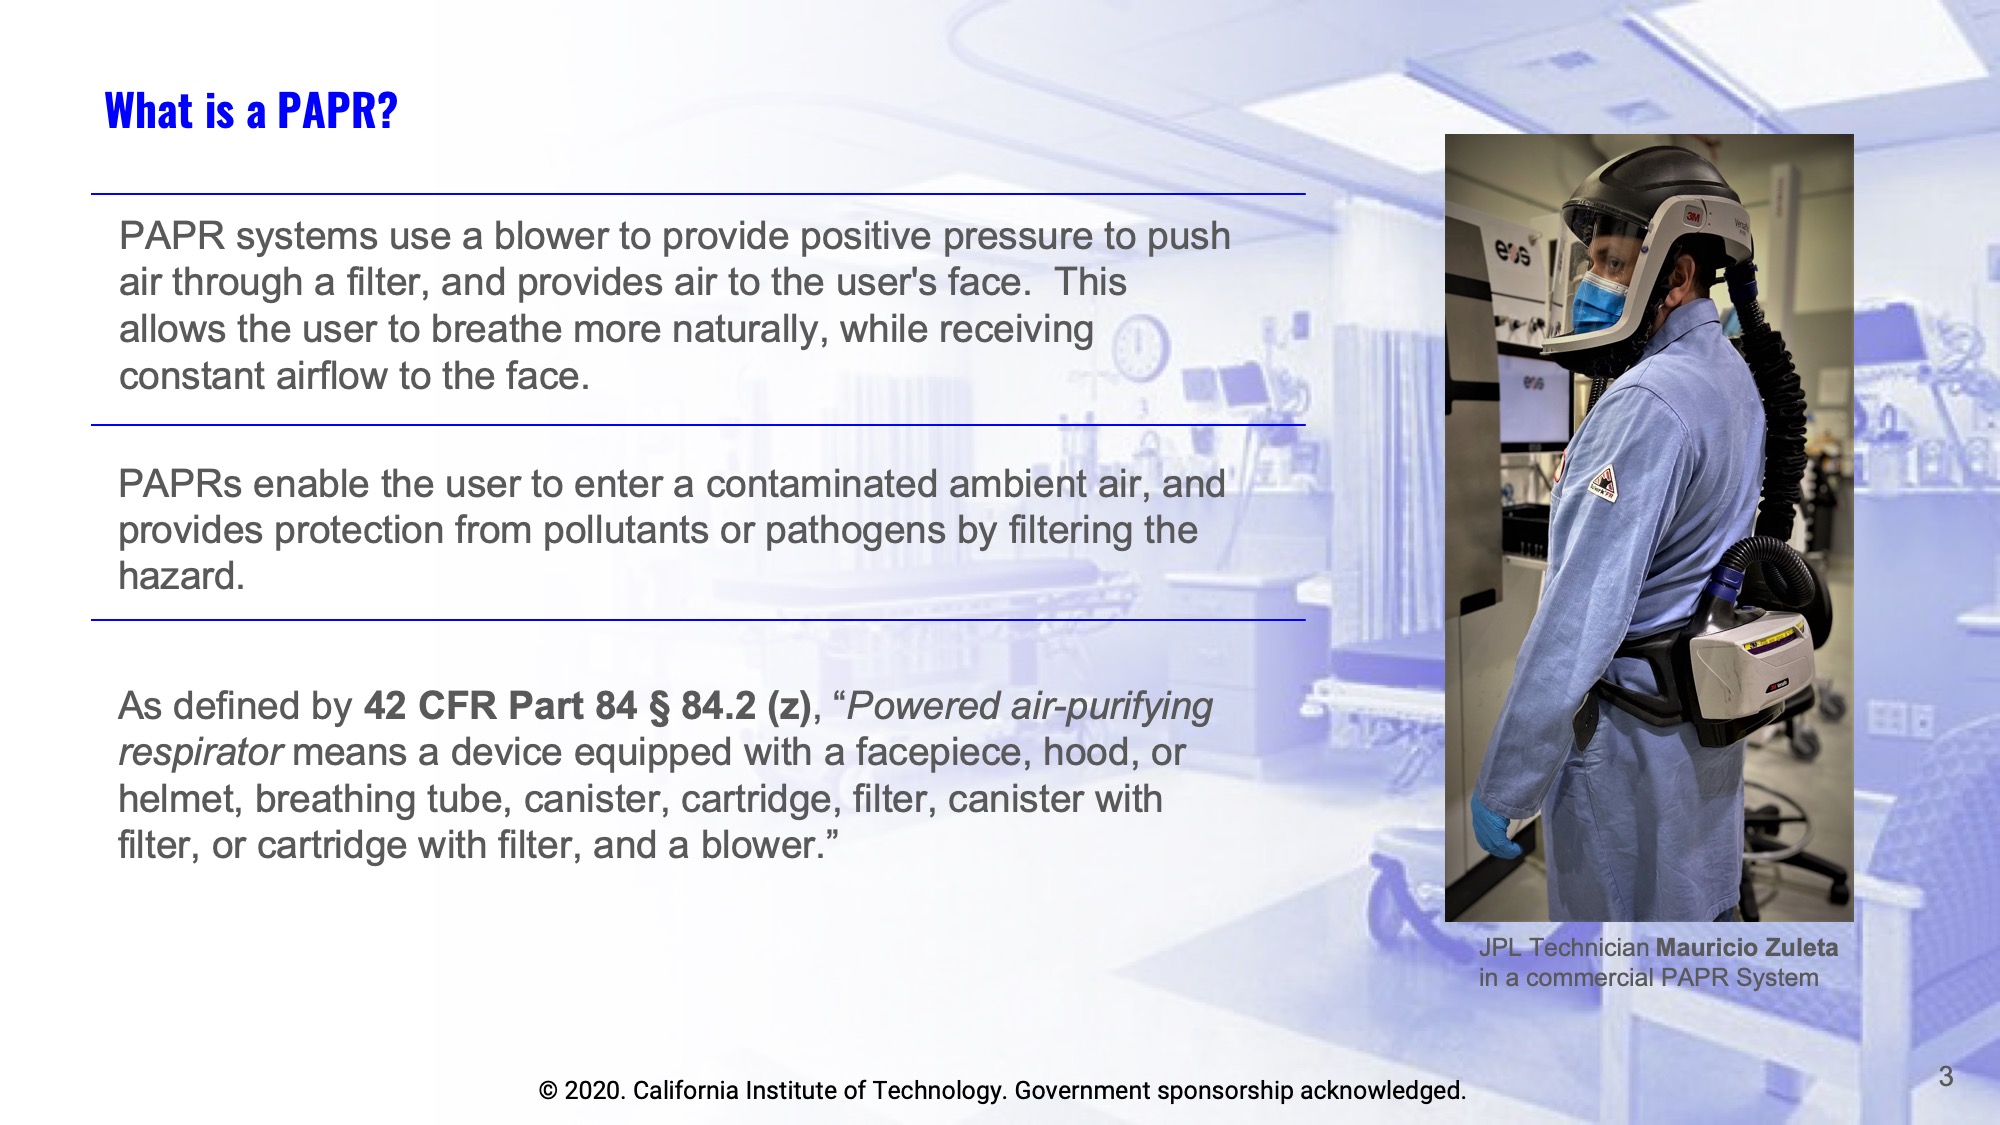 Slide 3: What is a PAPR?  PAPR systems use a blower to provide positive pressure to push air through a filter, and provides air to the user's face.  This allows the user to breathe more naturally, while receiving constant airflow to the face. PAPRs enable the user to enter a contaminated ambient air, and provides protection from pollutants or pathogens by filtering the hazard. As defined by 42 CFR Part 84 § 84.2 (z), Powered air-purifying respirator means a device equipped with a facepiece, hood, or helmet, breathing tube, canister, cartridge, filter, canister with filter, or cartridge with filter, and a blower. Pictured - JPL Technician Mauricio Zuleta in a commercial PAPR System